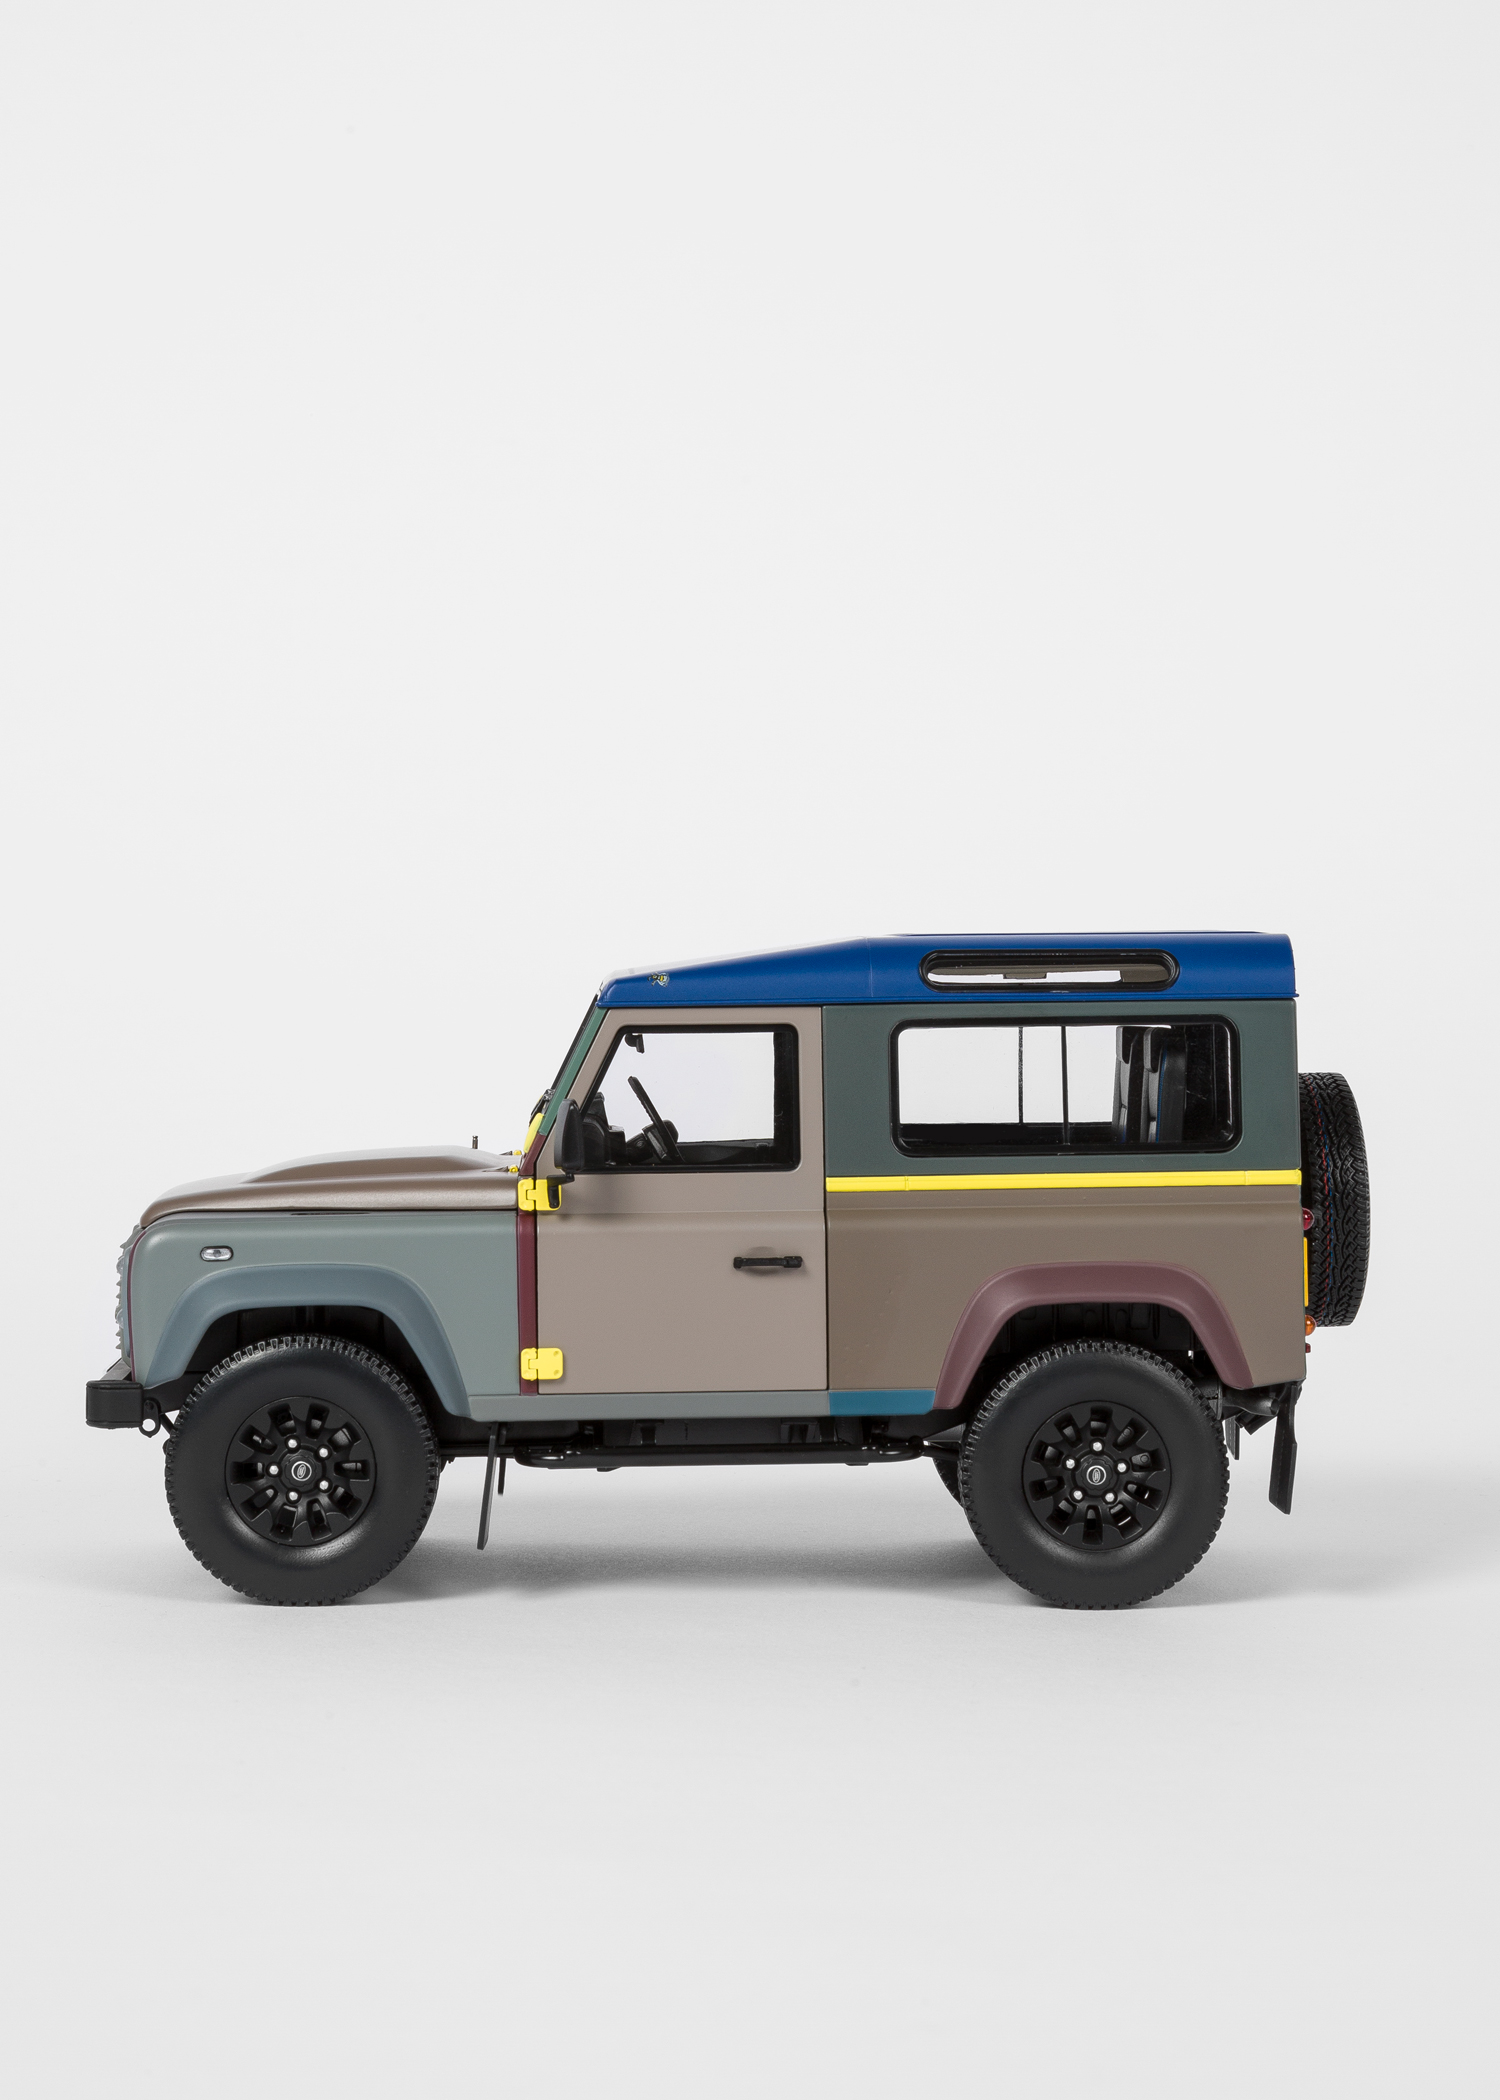 Second Side View - Paul Smith + Land Rover - Defender 90 1/18 Die Cast Metal Collector's Edition 